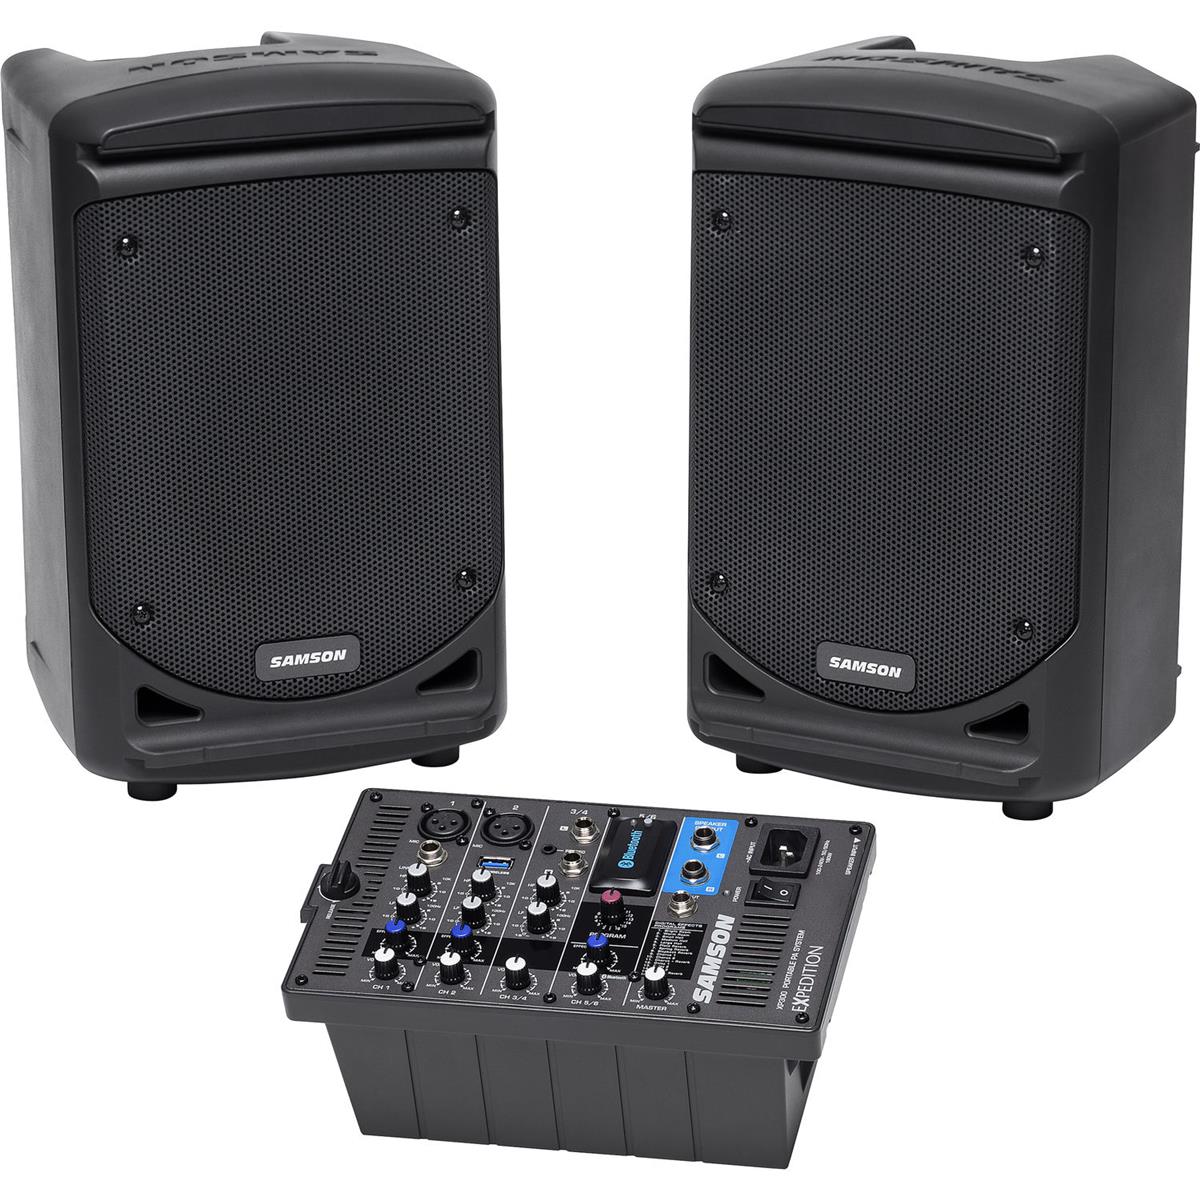 Image of Samson Expedition XP300 6&quot; 2-Way 300W Bluetooth-Enabled Stereo Speaker System